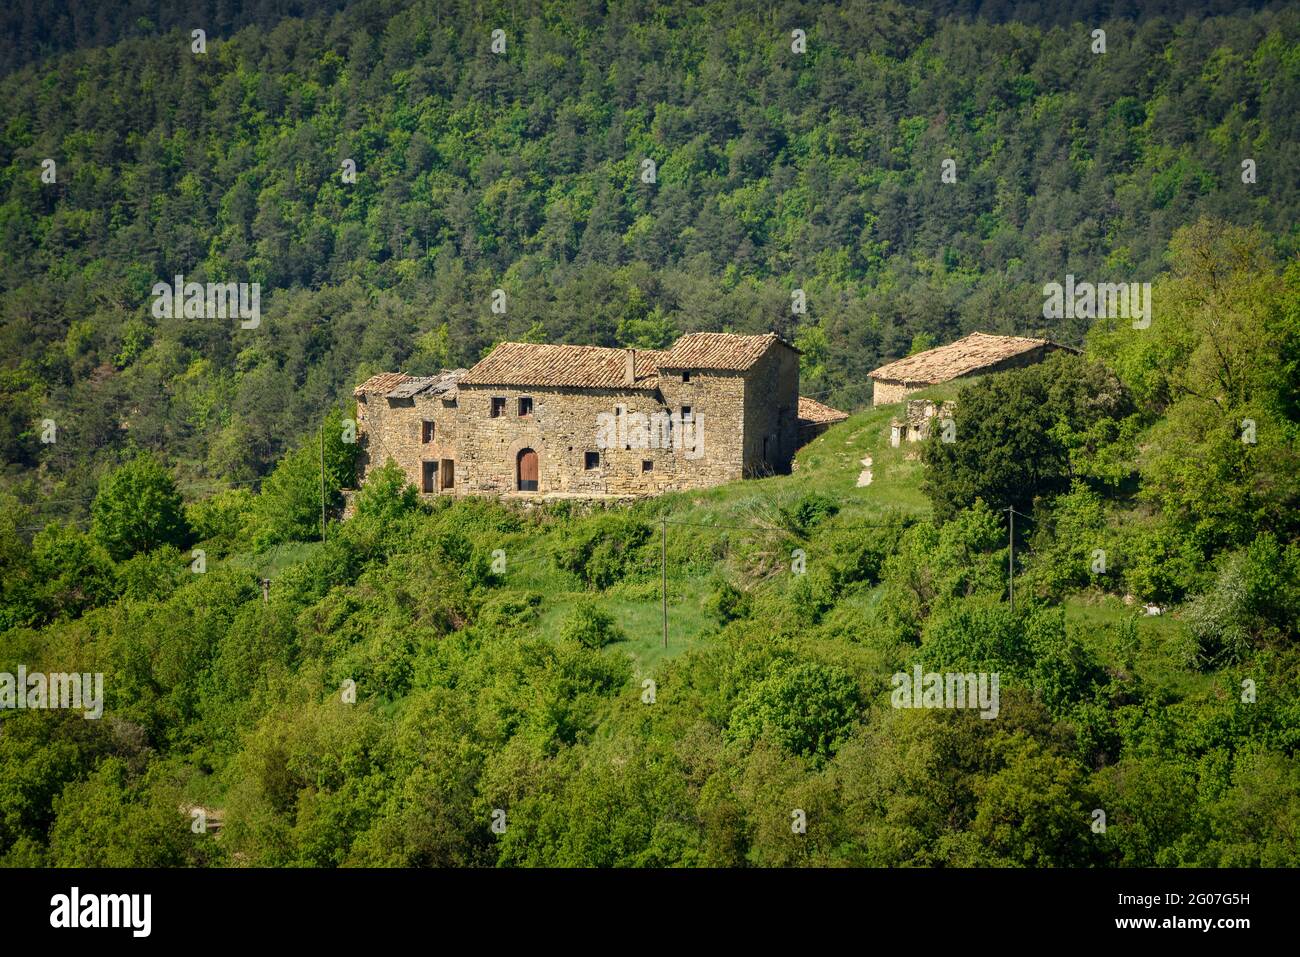 Surroundings of Santa Llúcia de Sobremunt in spring. Mas Conjunta country house in the foreground and Montserrat in the background (Catalonia, Spain) Stock Photo